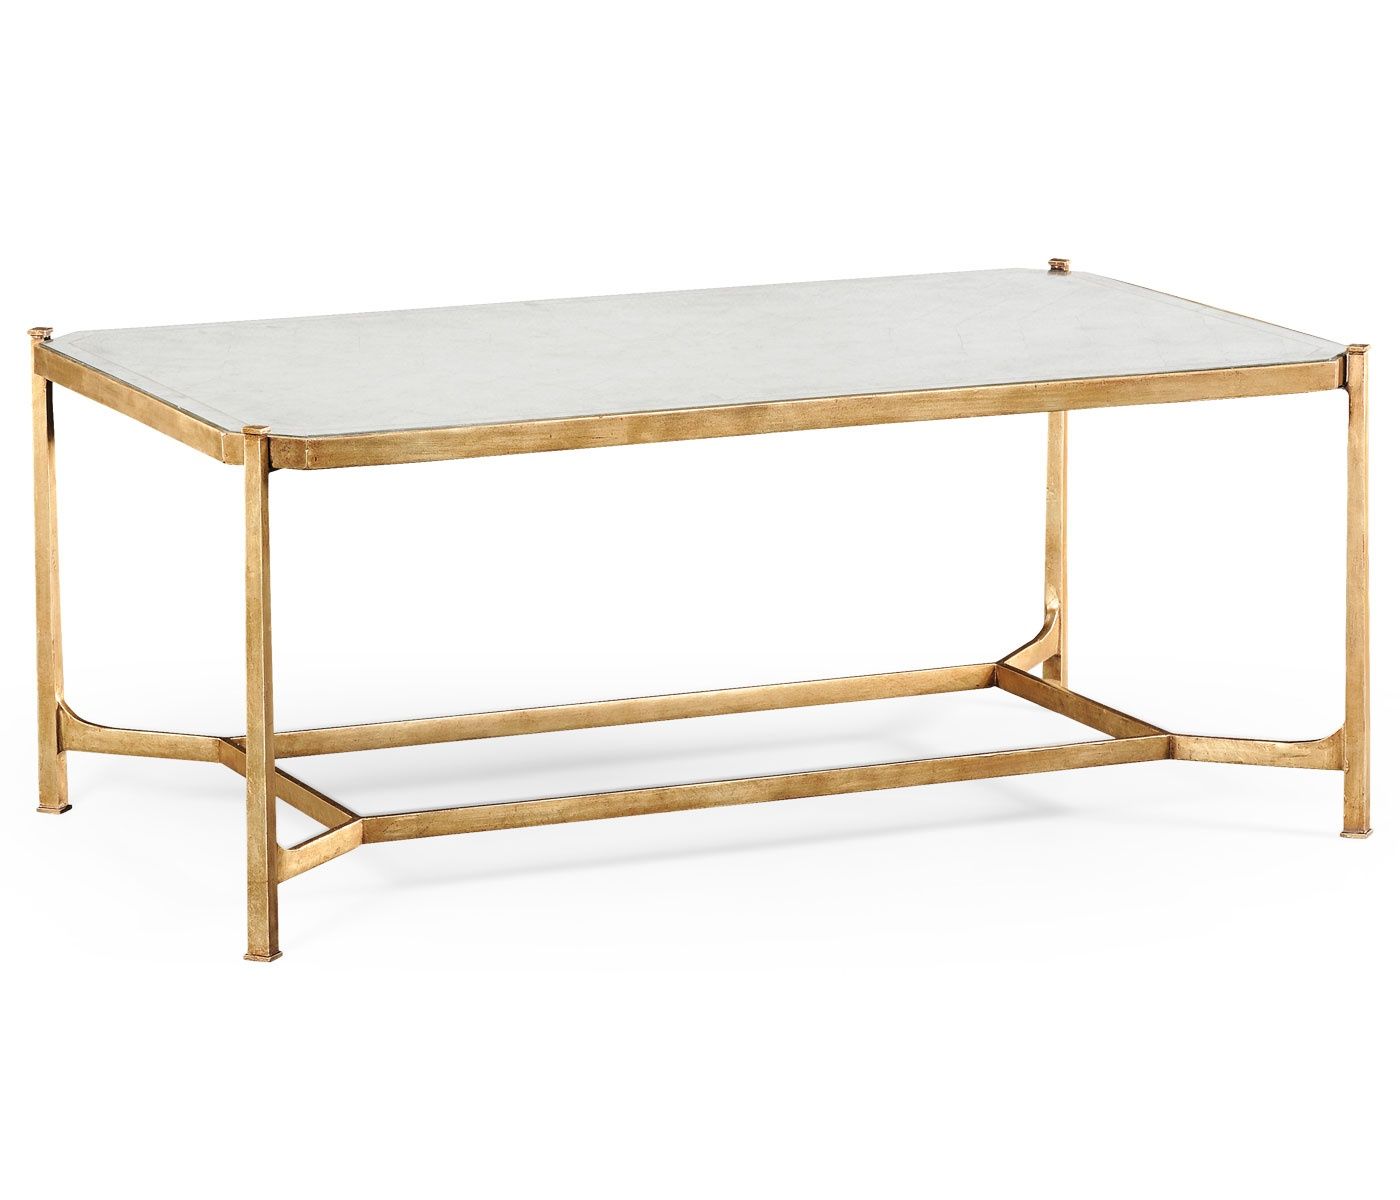 French Glass Gold Coffee Table | Swanky Interiors Within Antique Gold And Glass Coffee Tables (View 15 of 15)